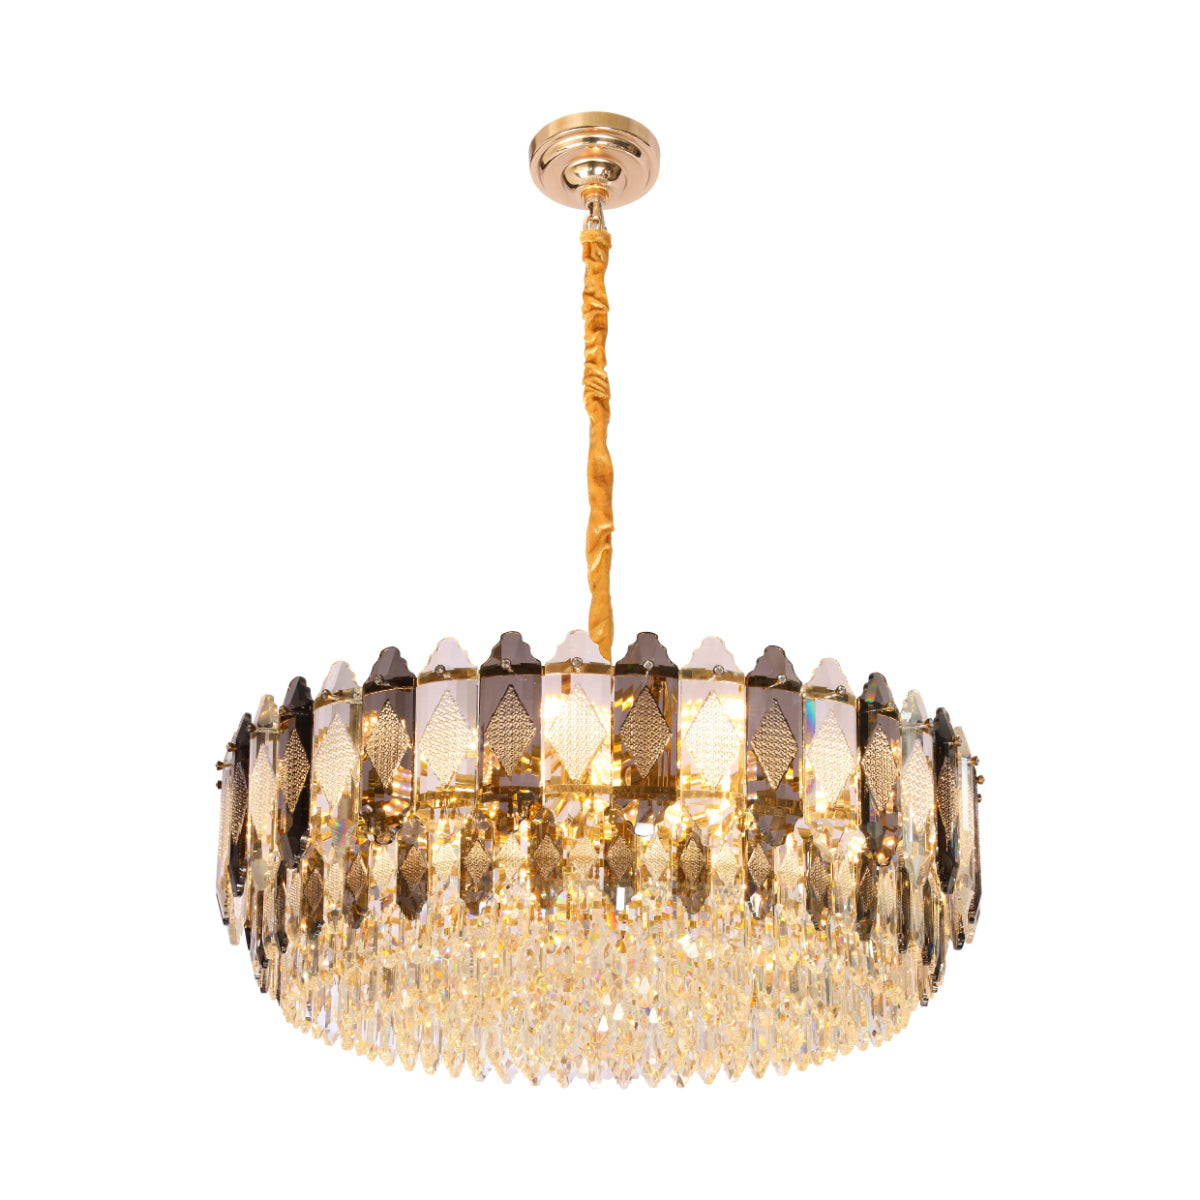 Main image of Deluxe Smoky Clear Crystal Modern Chandelier Light Gold | TEKLED 159-18004